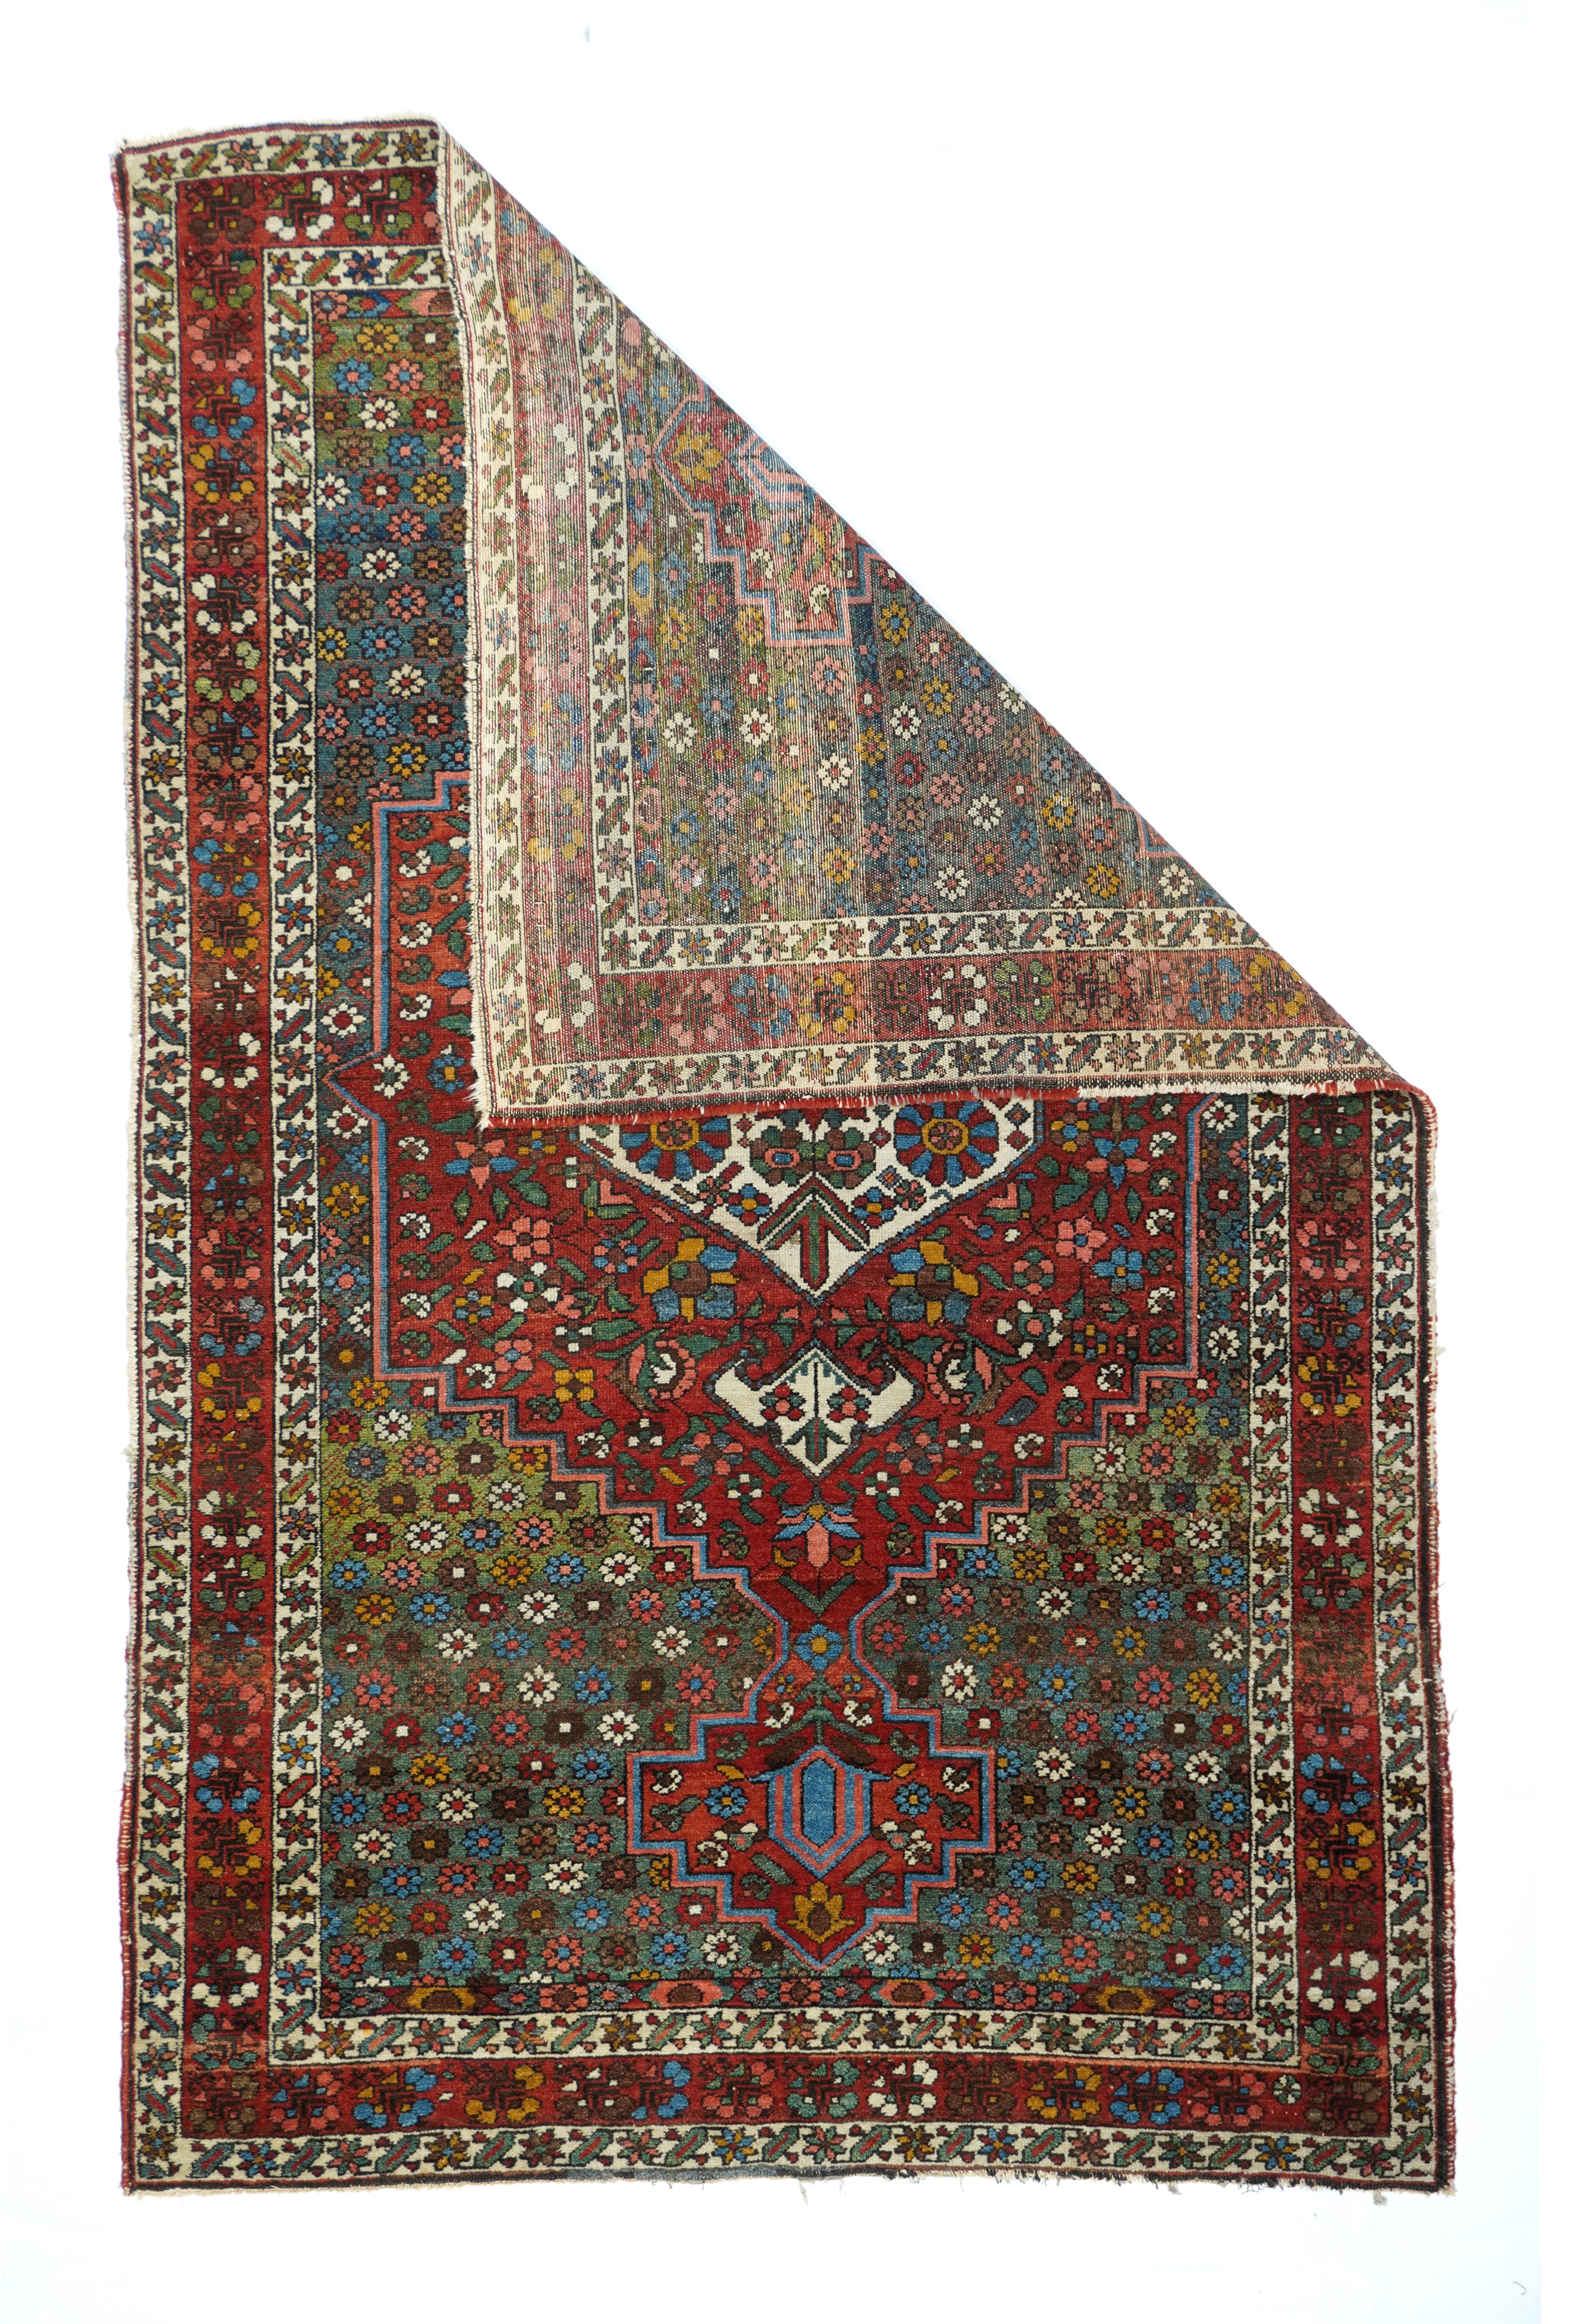 Vintage Tabriz rug, measures : 9'9'' x 13'9''. The delightfully abrashed green field is filled with randomly colored small rosettes, and hosts a red stepped medallion with gigantic tonally en suite pendants and an eggshell sub-medallion with its own